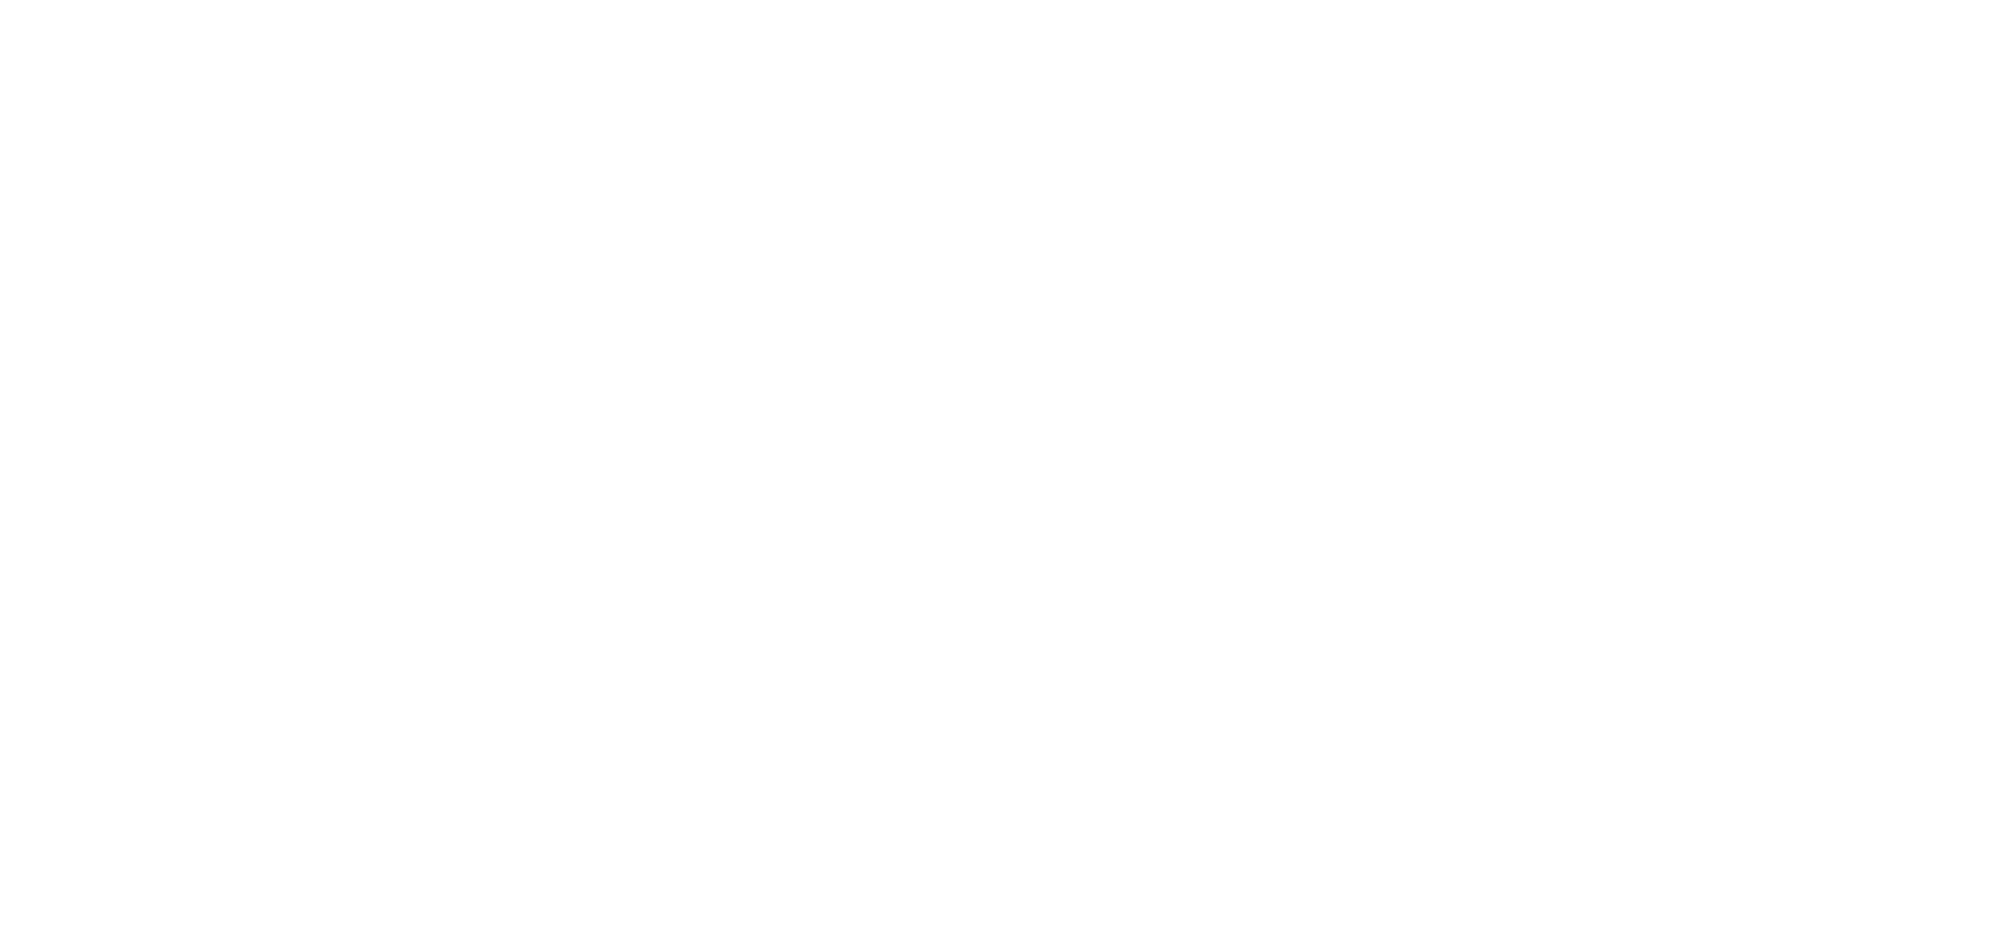 Storm Lake Title And Tagline. A Newspaper. A Family. A Community.